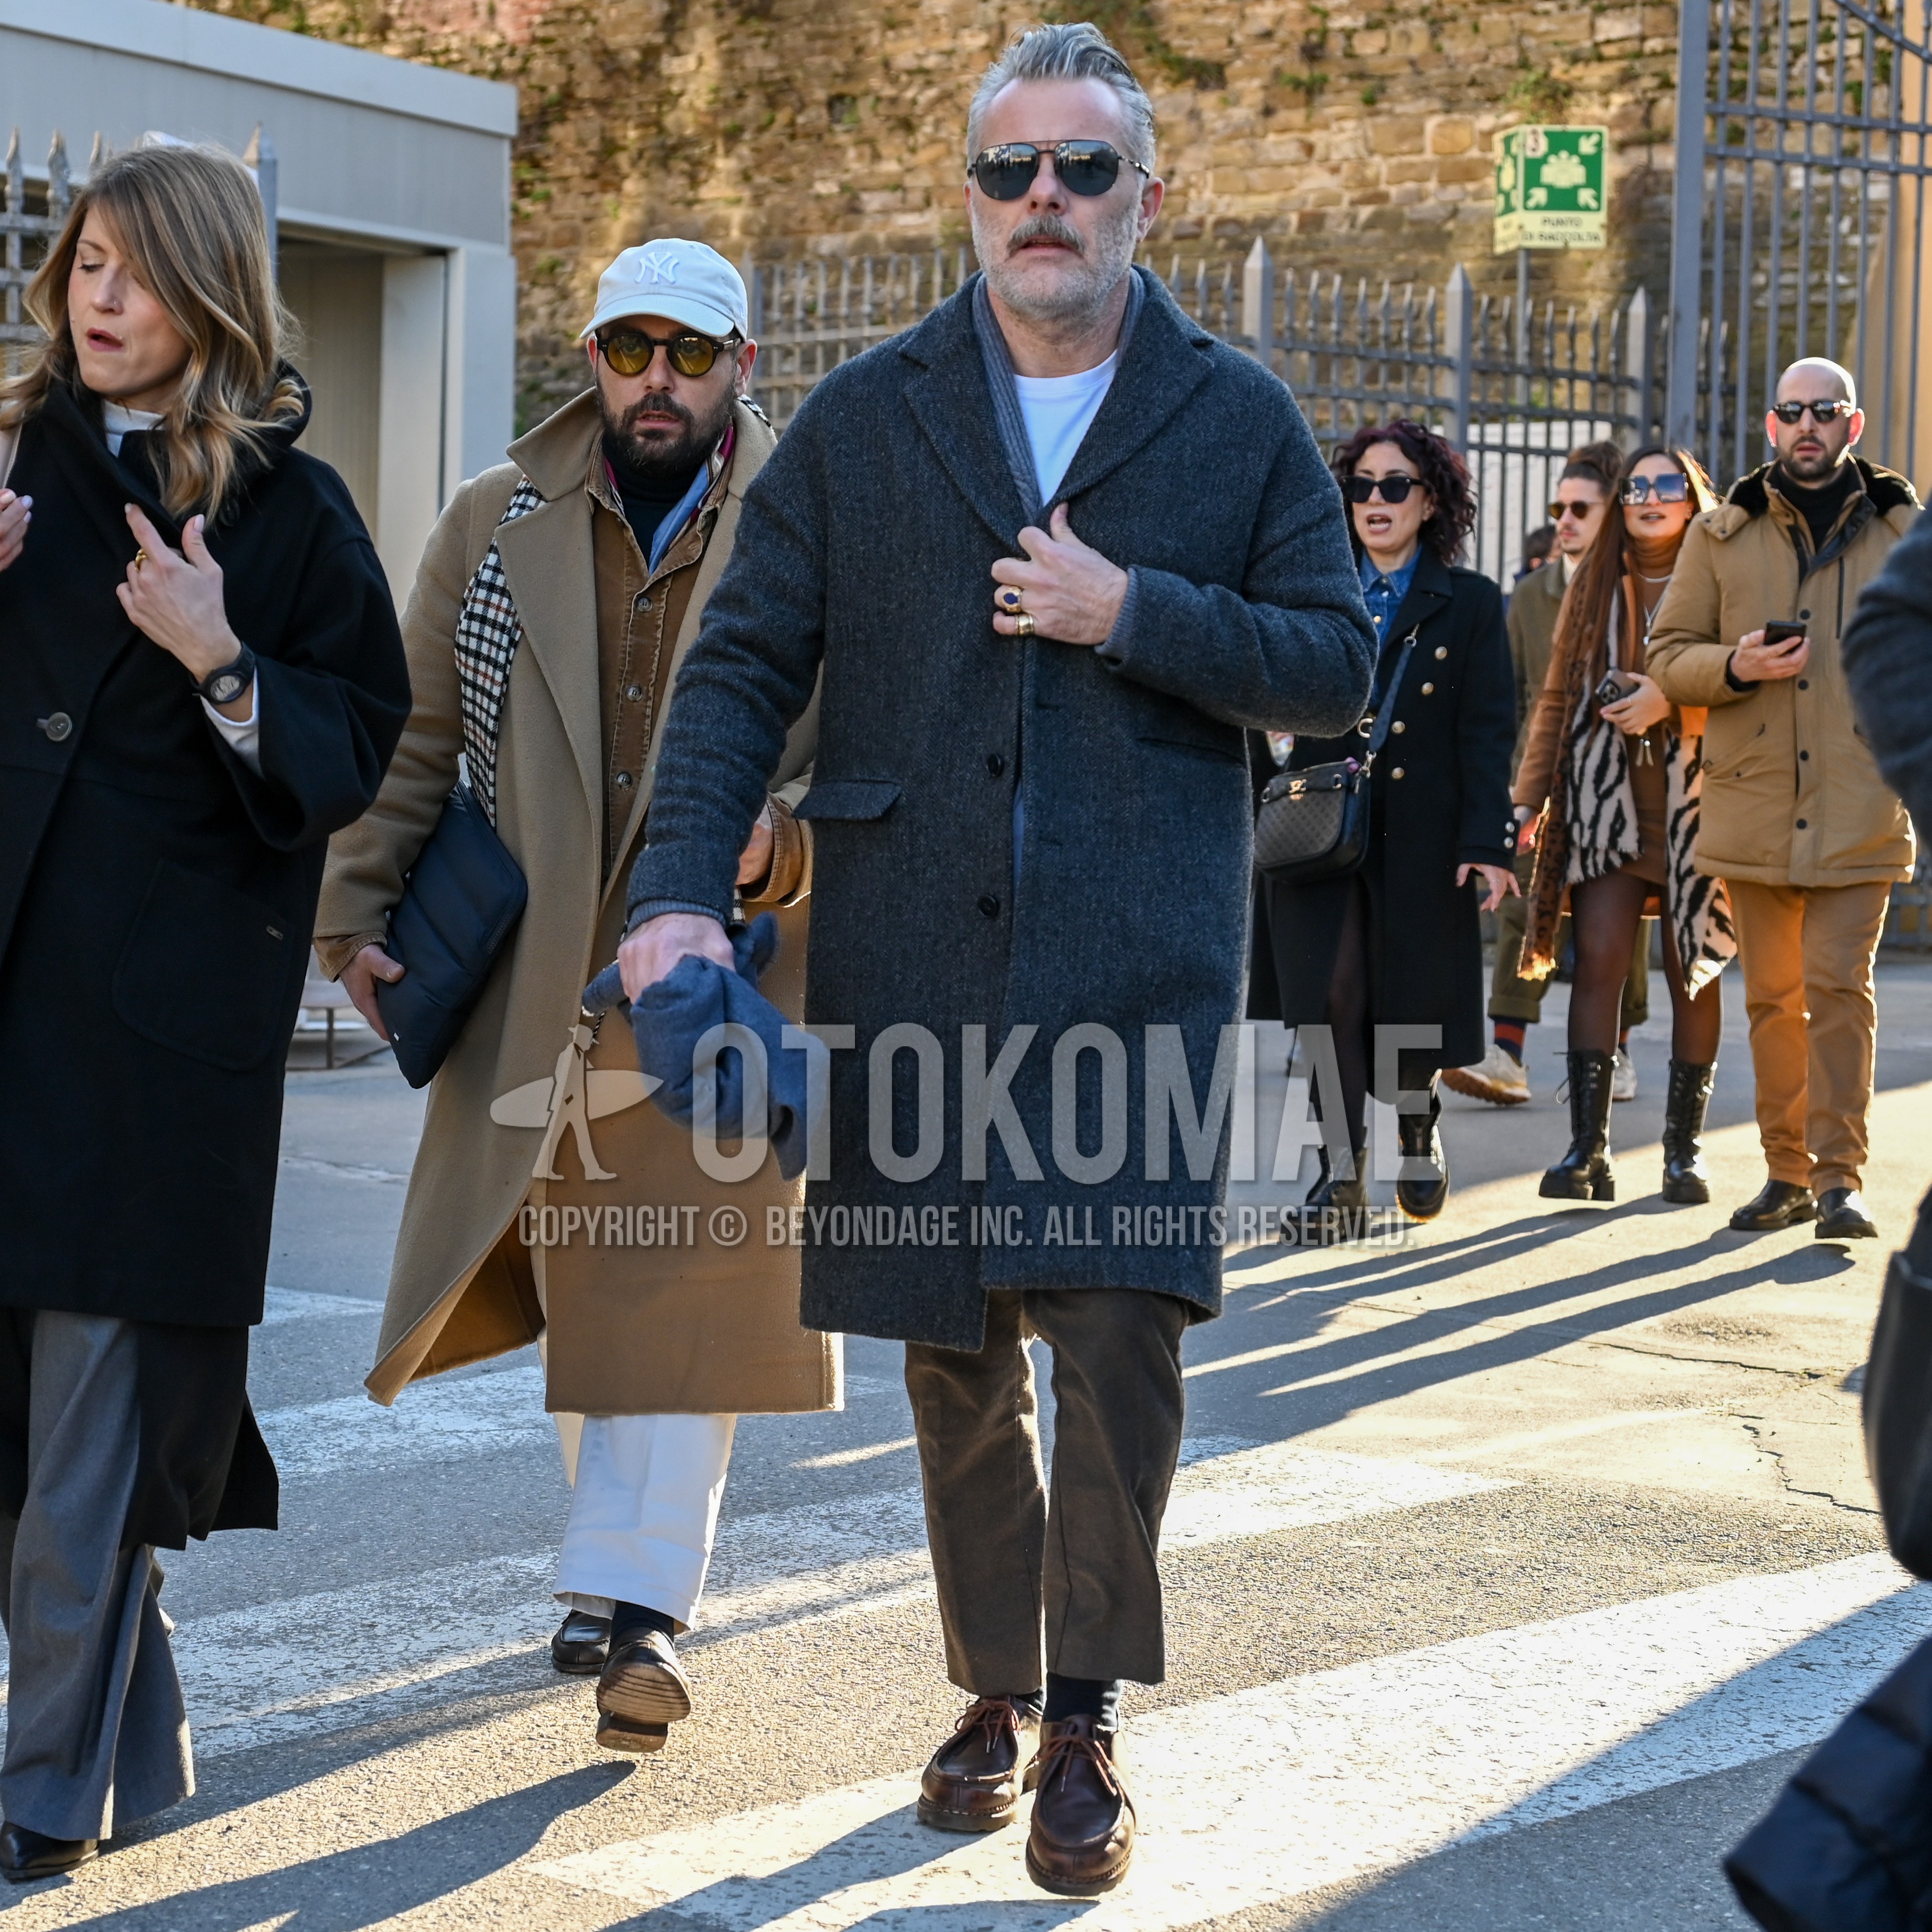 Men's autumn winter outfit with black plain sunglasses, dark gray plain scarf, dark gray plain chester coat, dark gray stripes cardigan, white plain long sleeve t-shirt, brown plain chinos, black plain socks, brown  loafers leather shoes.